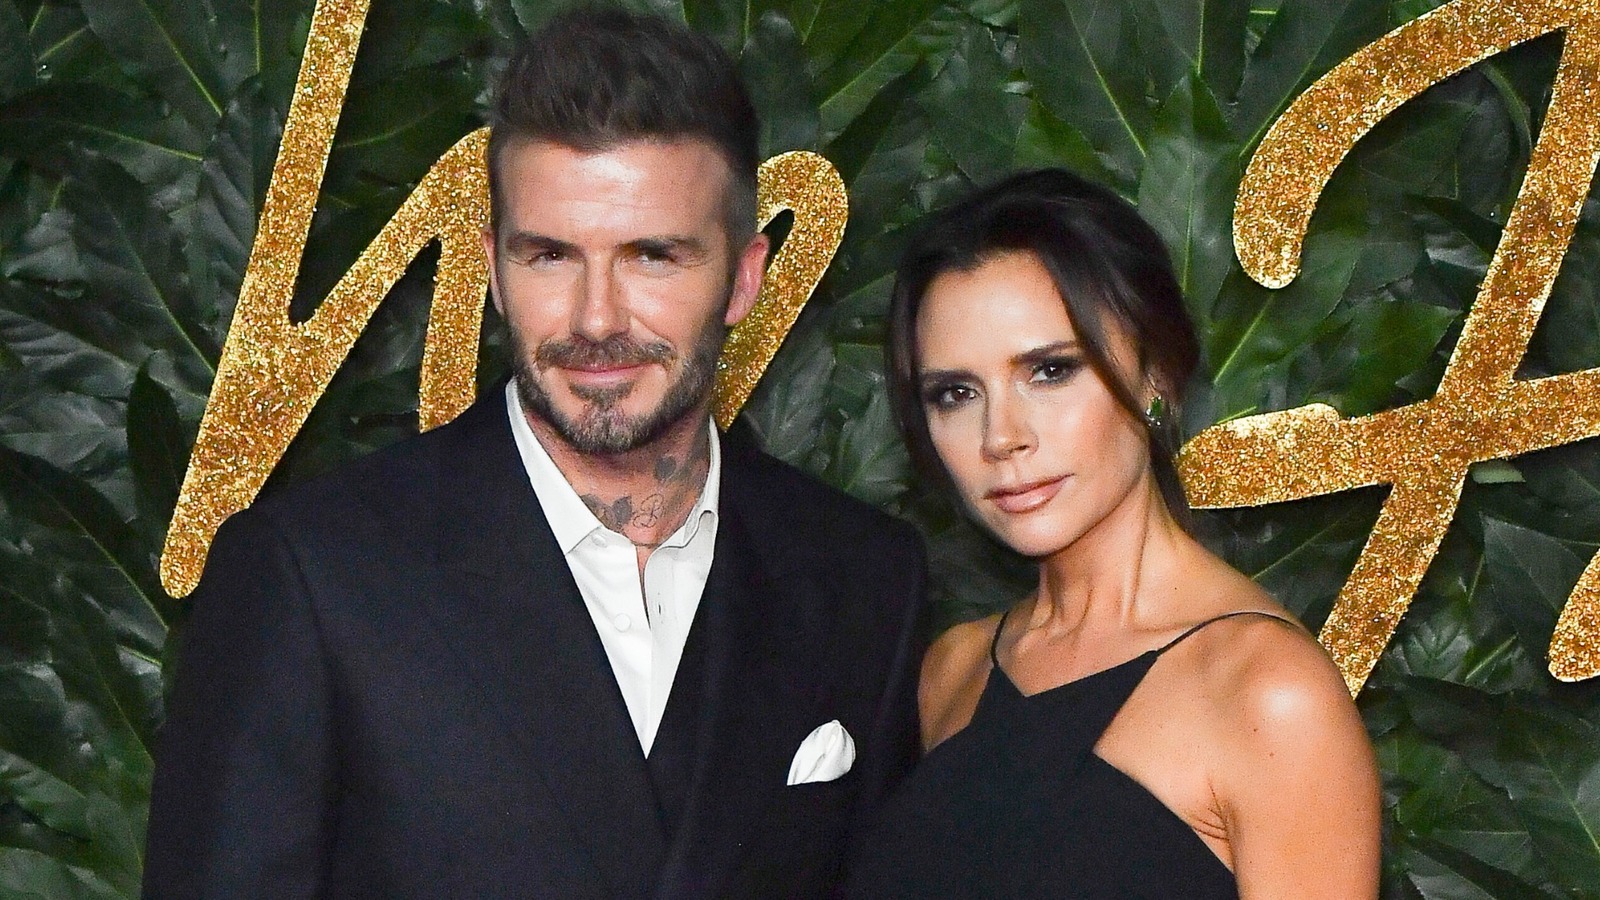 All About The Affair Rumors That Have Plagued David And Victoria Beckham's  Marriage